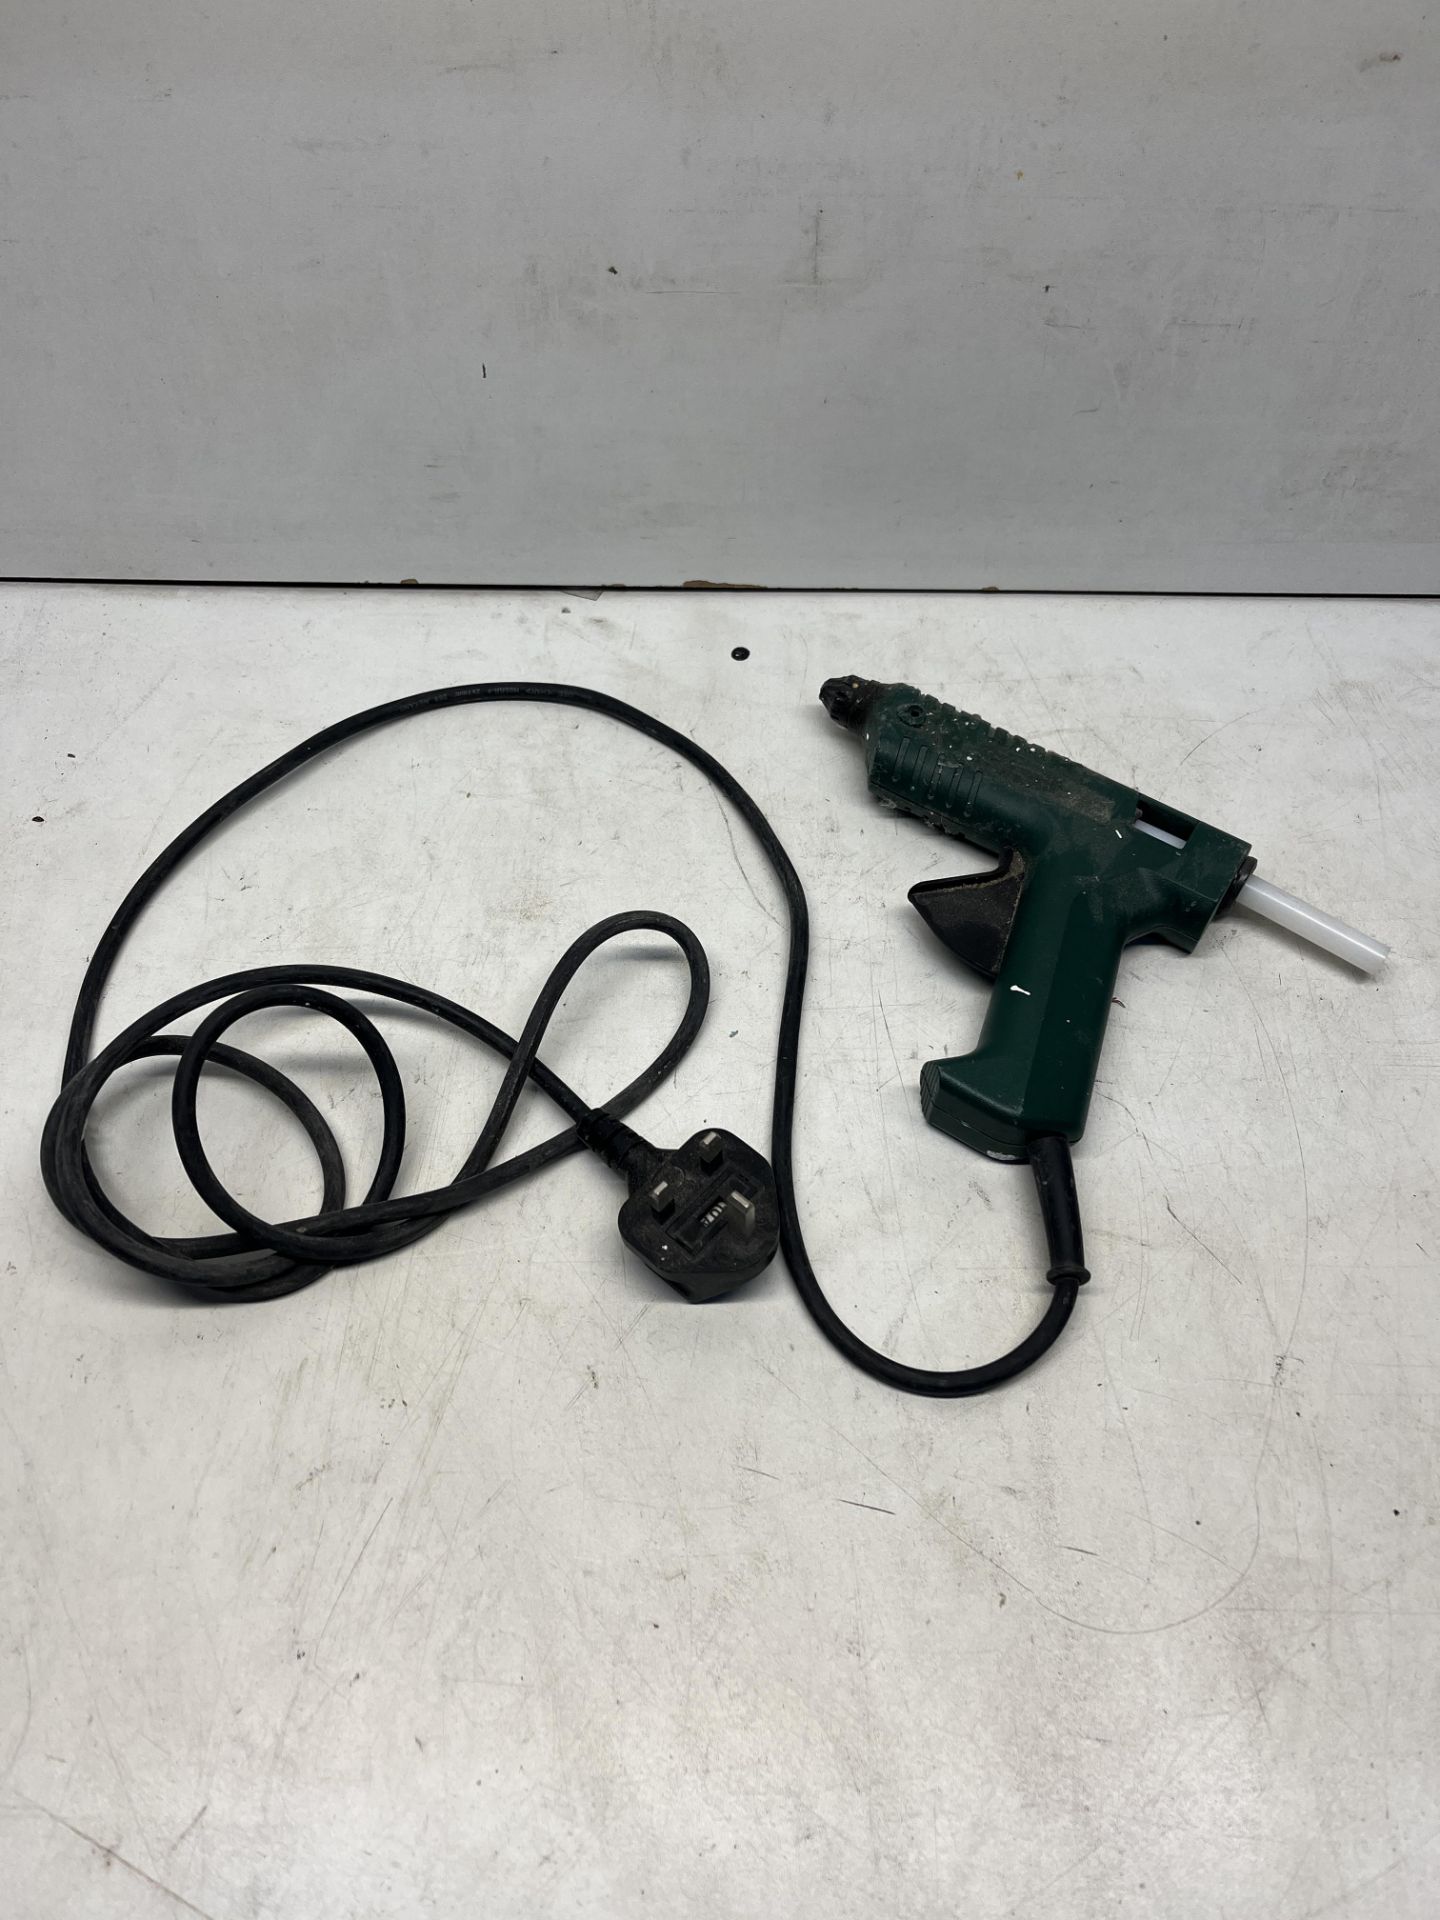 Glue Gun, Rotary Tool and Magnets - Image 8 of 11